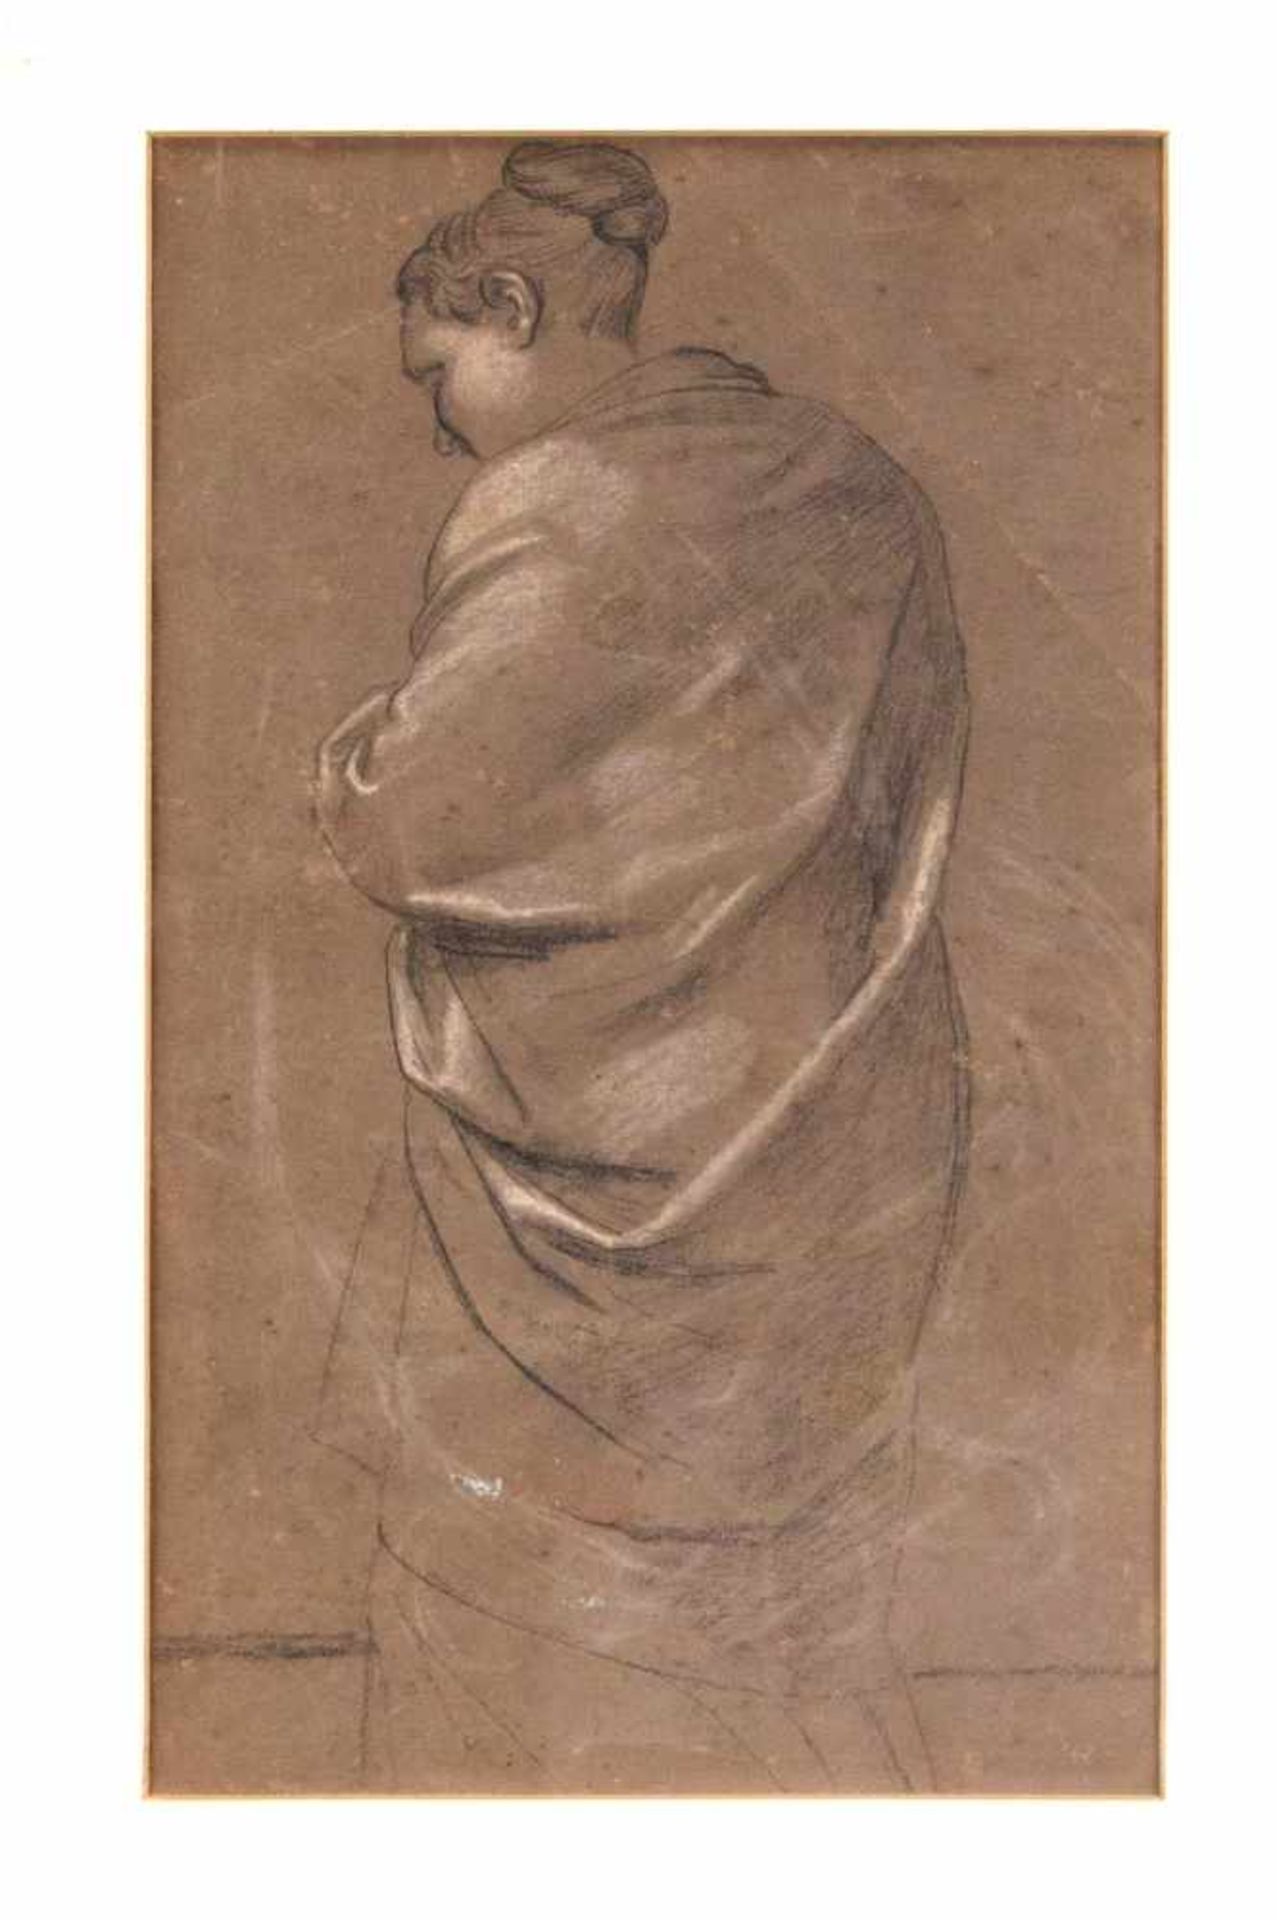 Anonymous artist of the 19th century, study of a back figure with a cloak, black and whitechalk on